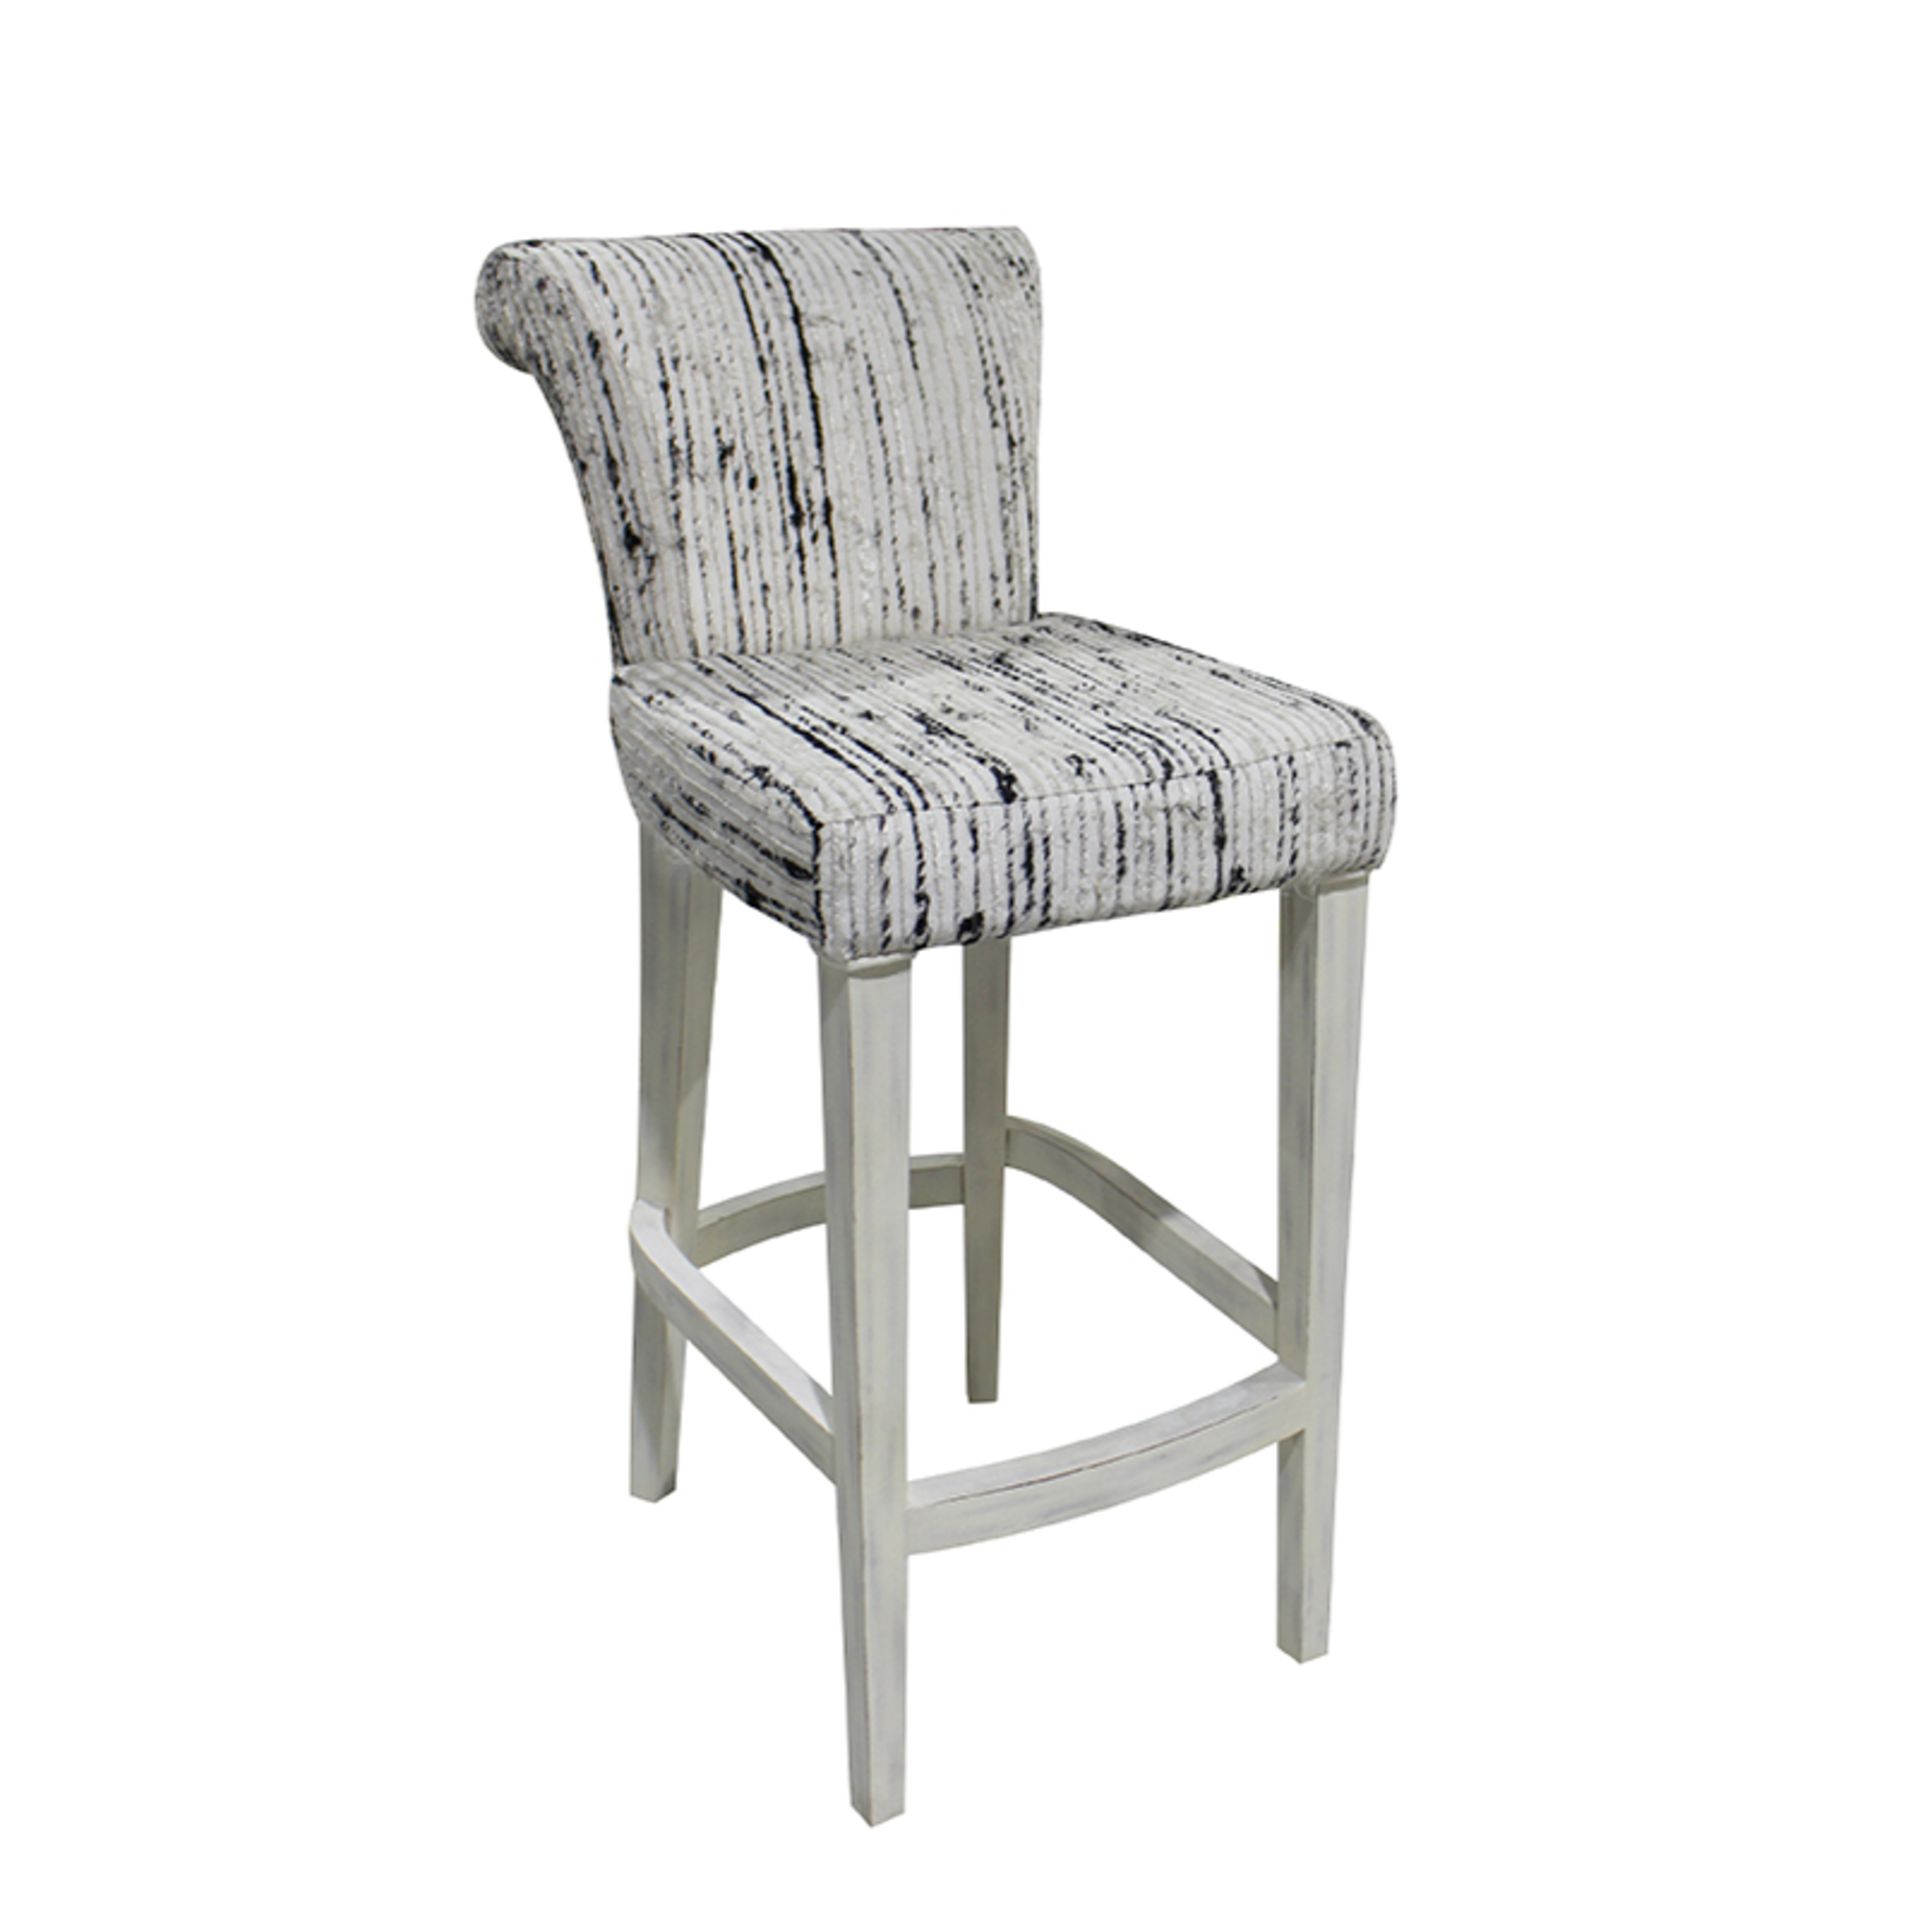 Addiction Bar stool Upholstered in Eco viscose white White legs with distressed corners Size: 54.5 x